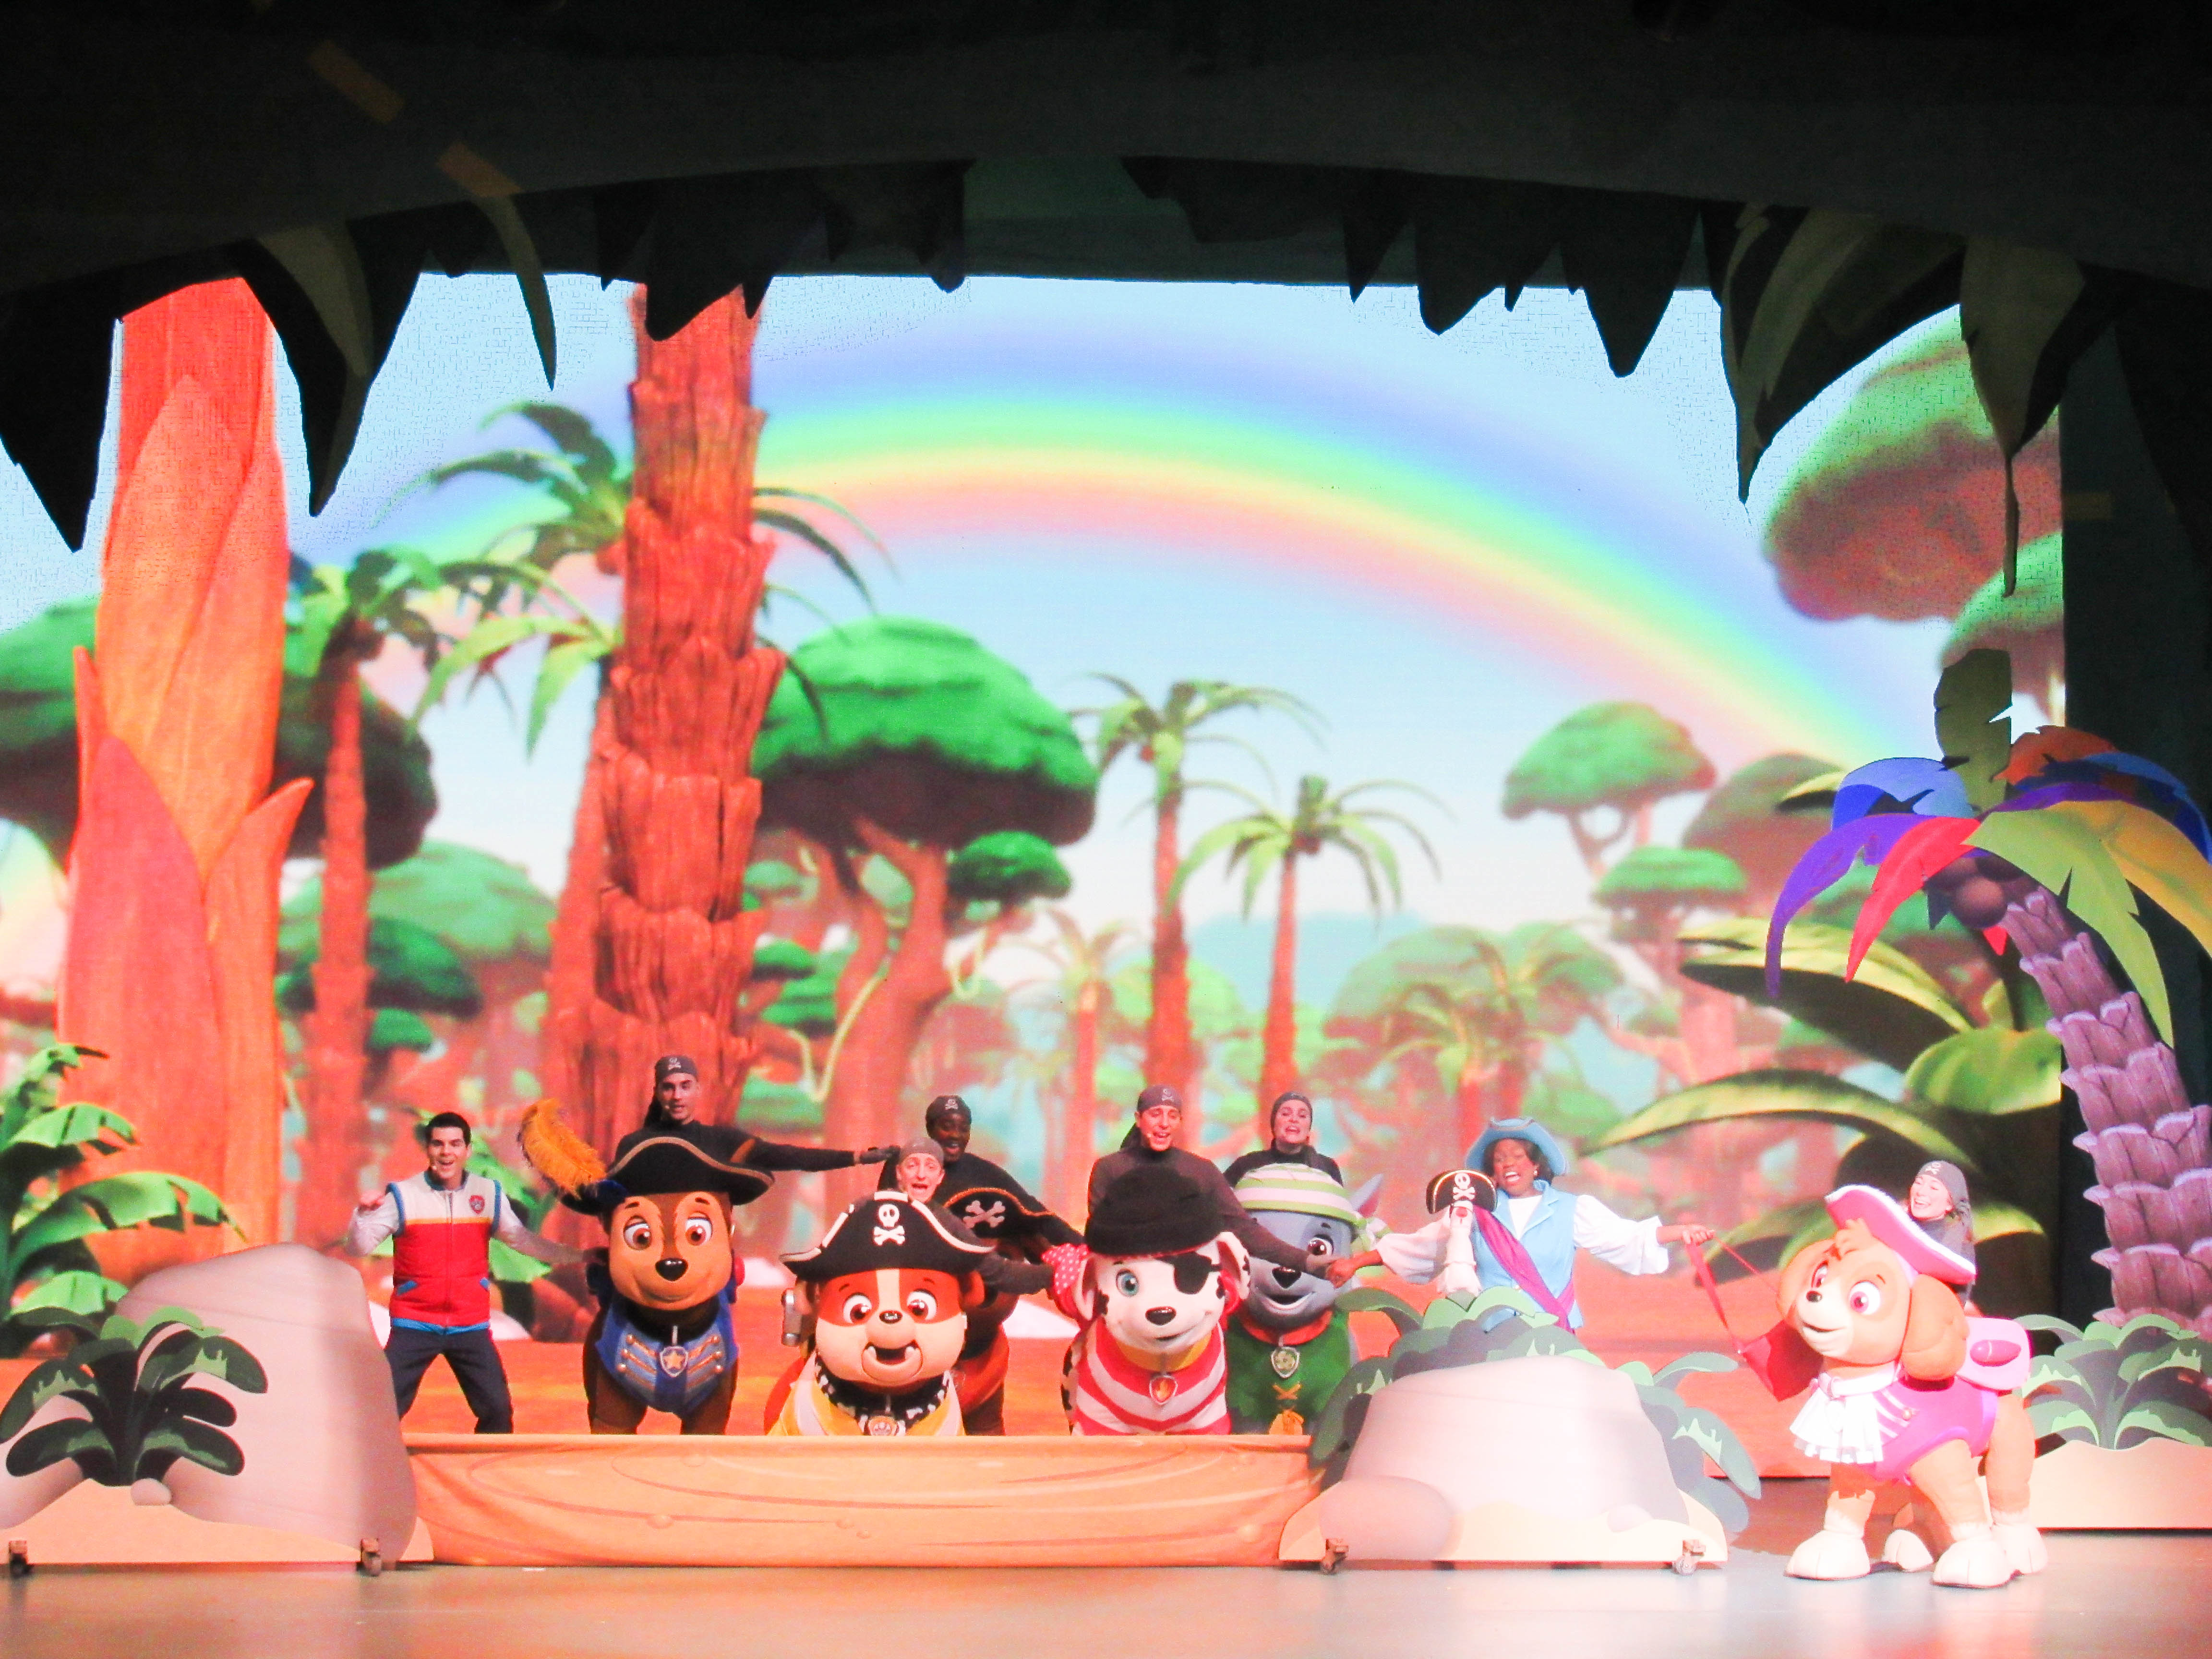 Our night at PAW Patrol Live! ” The Great Pirate Adventure